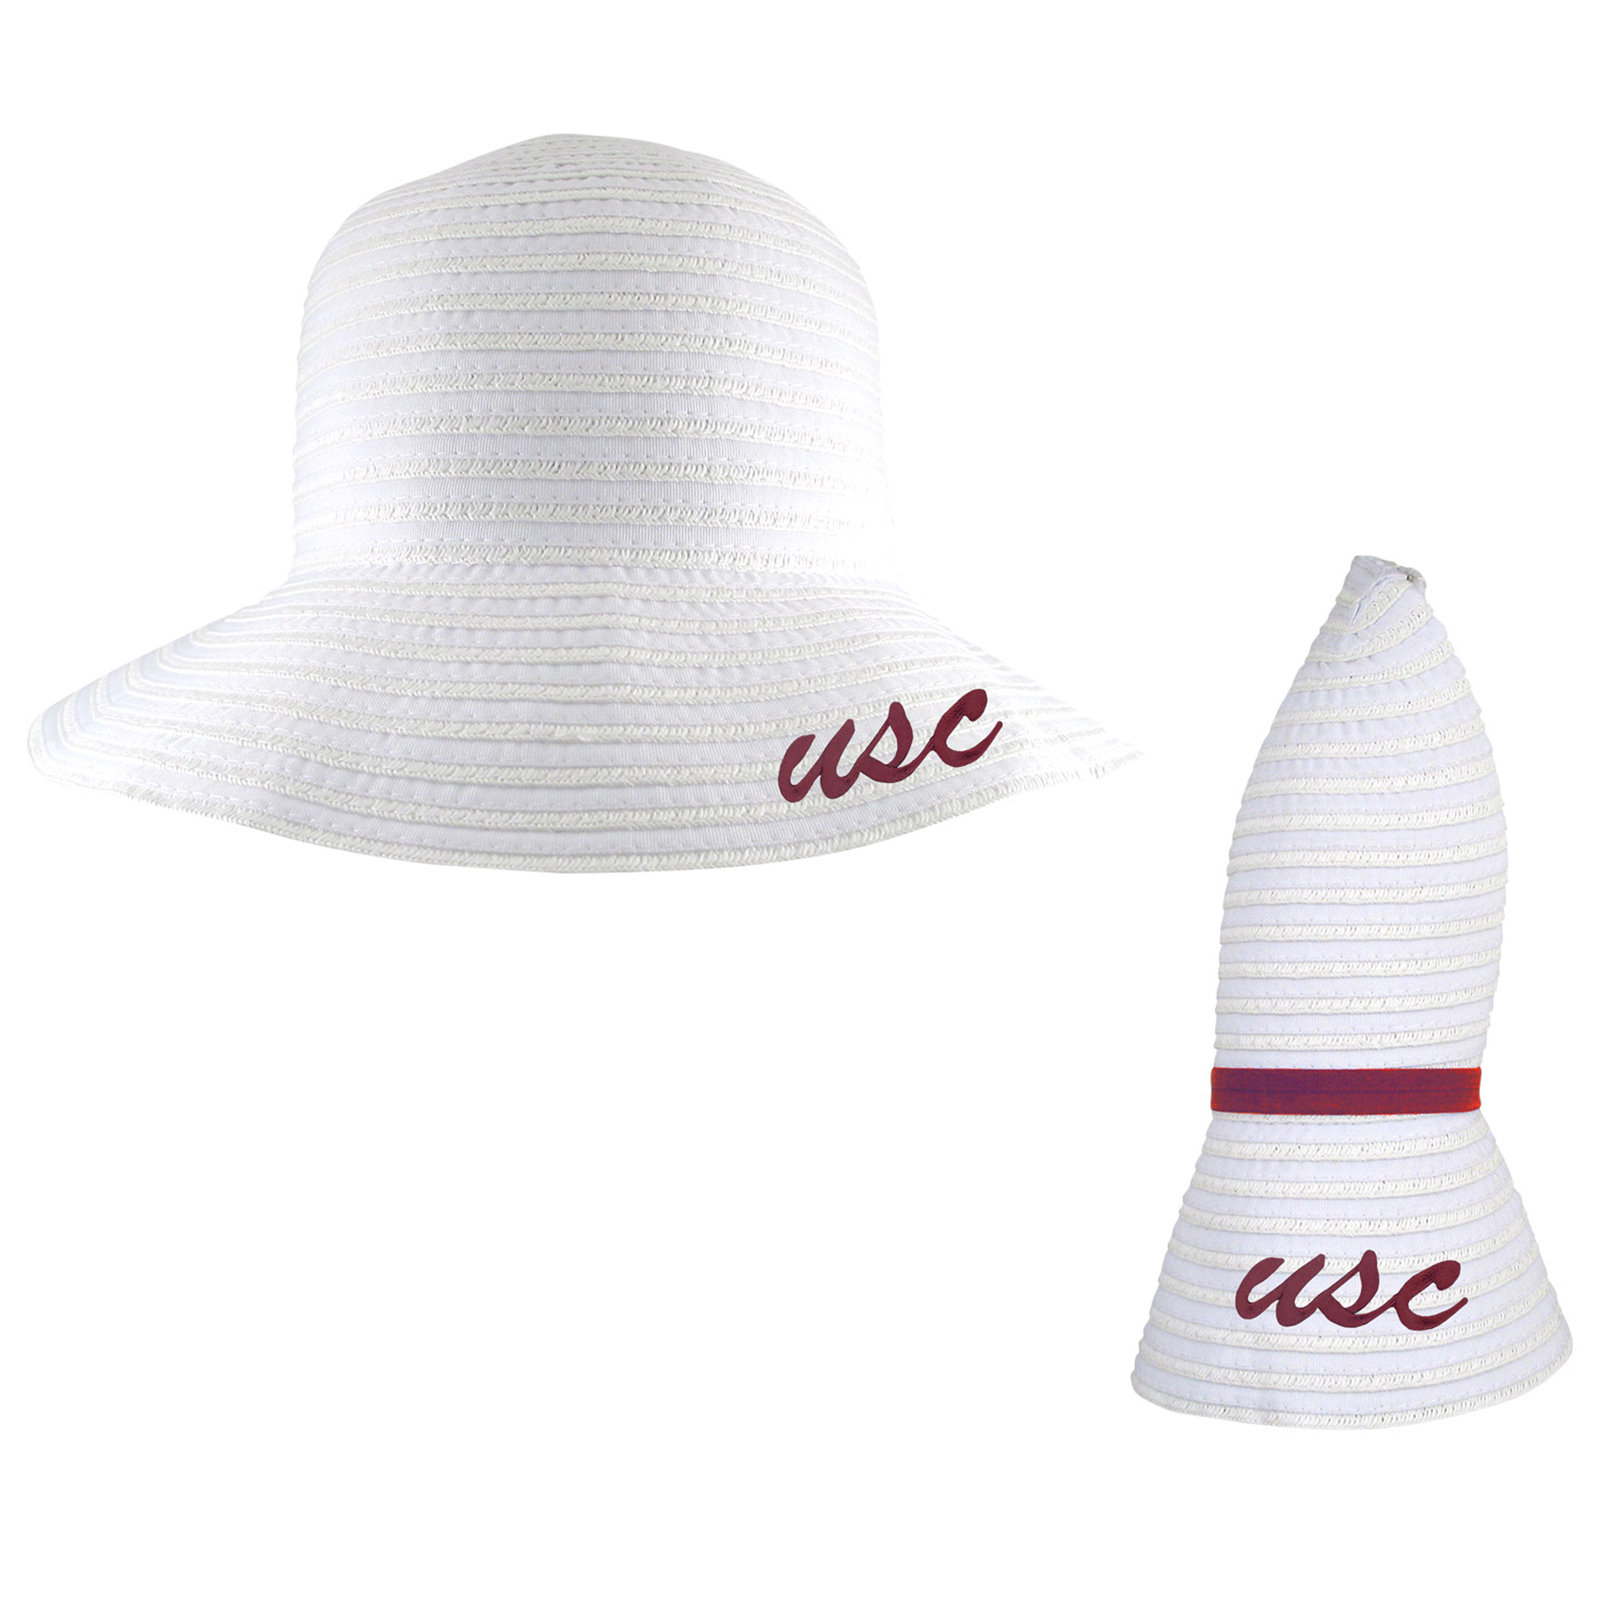 USC Script Womens Amelia Collapsible Sun Hat/Hair Band image01